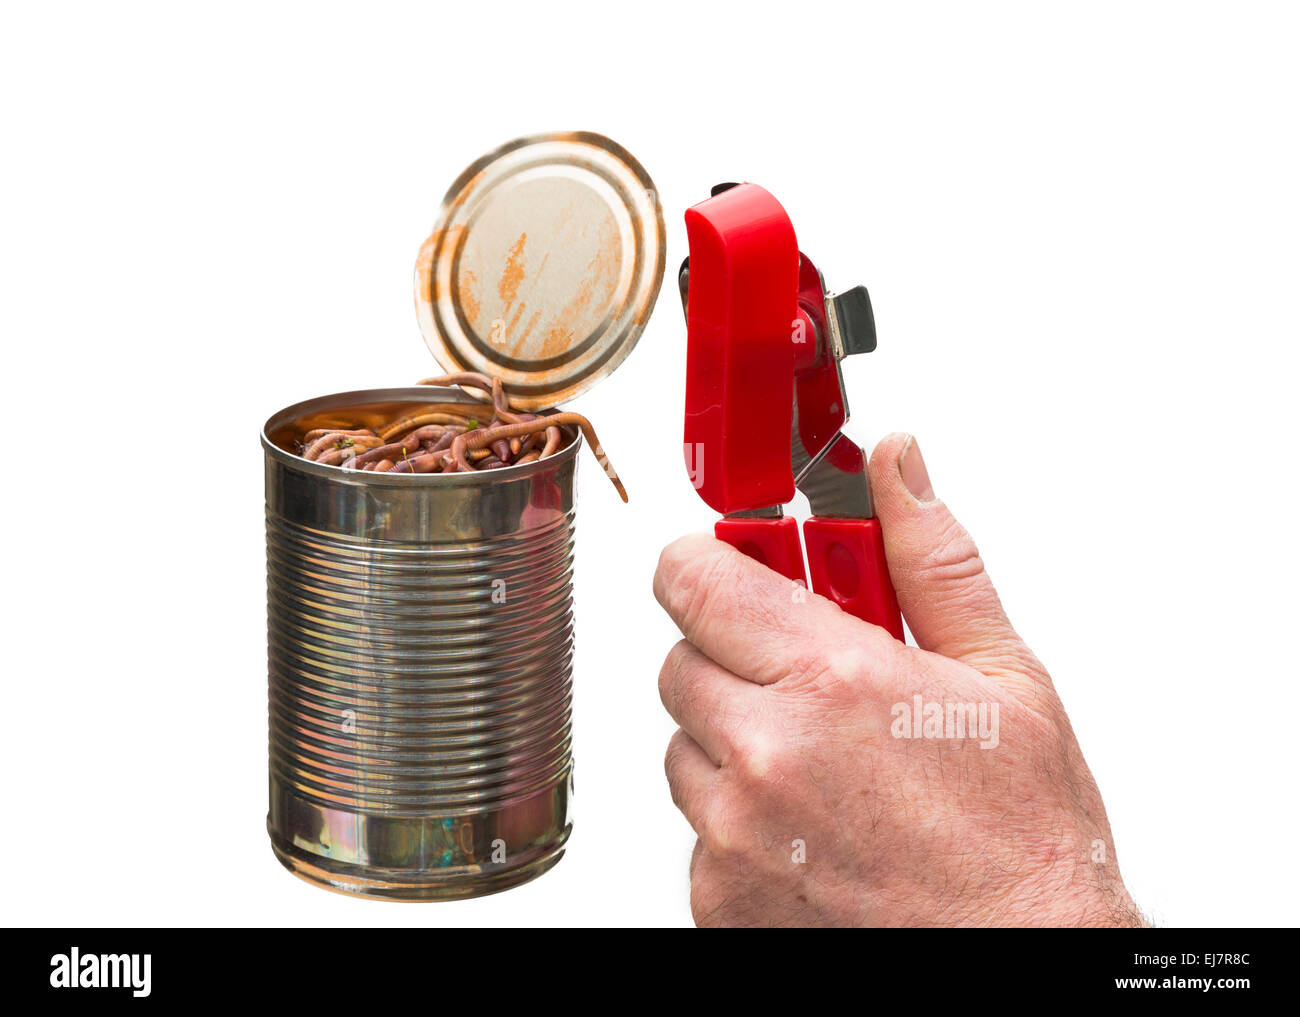 can of worms concept image opened on isolated white background with can opener held in hand Stock Photo